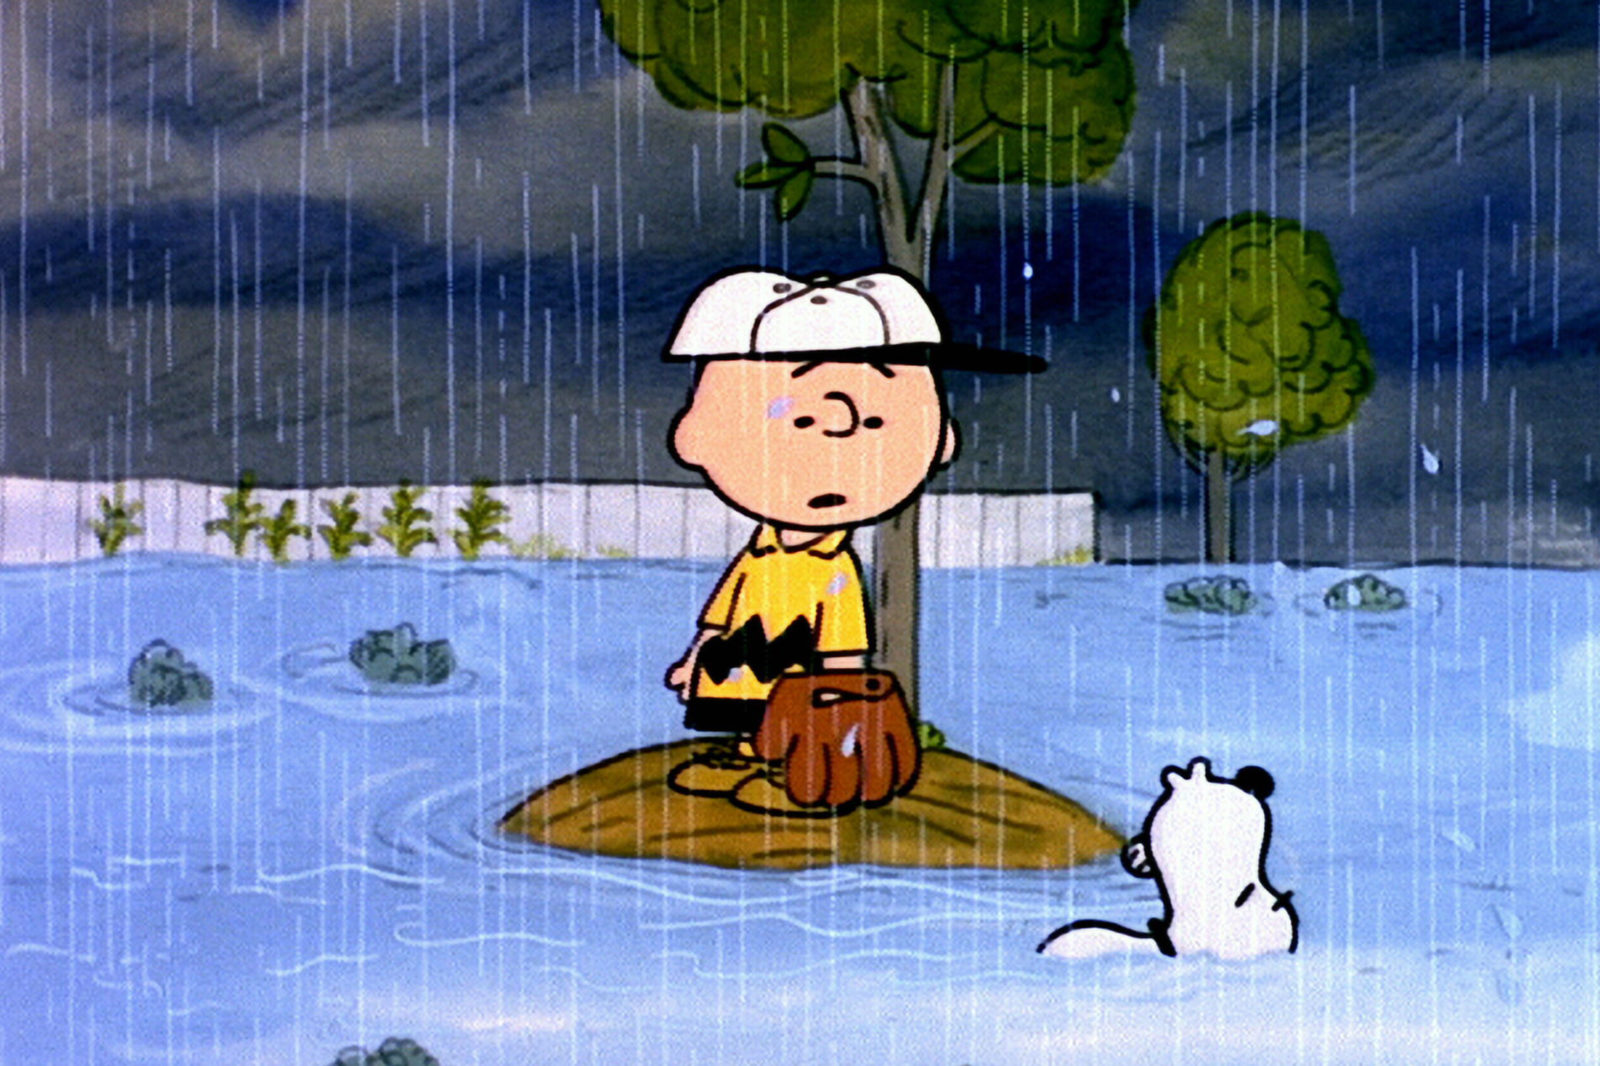 Charlie Brown - Daily Devotional